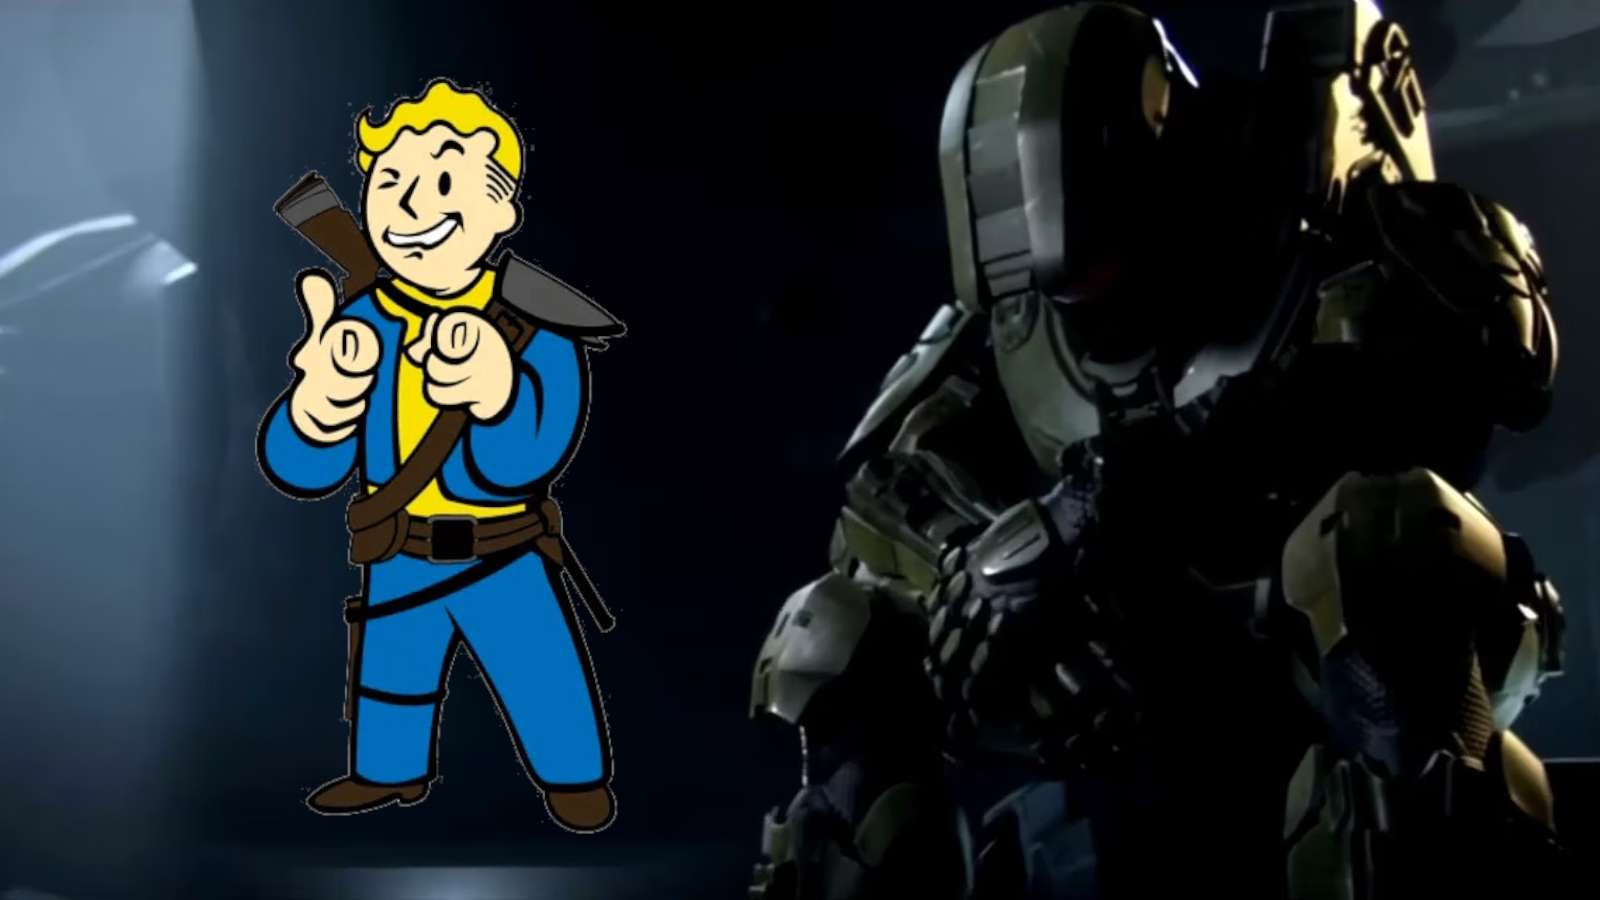 Halo-fans-slam-microsoft-for-fallout-show-success-master-chief-sad-vault-boy-wink-point.jpg